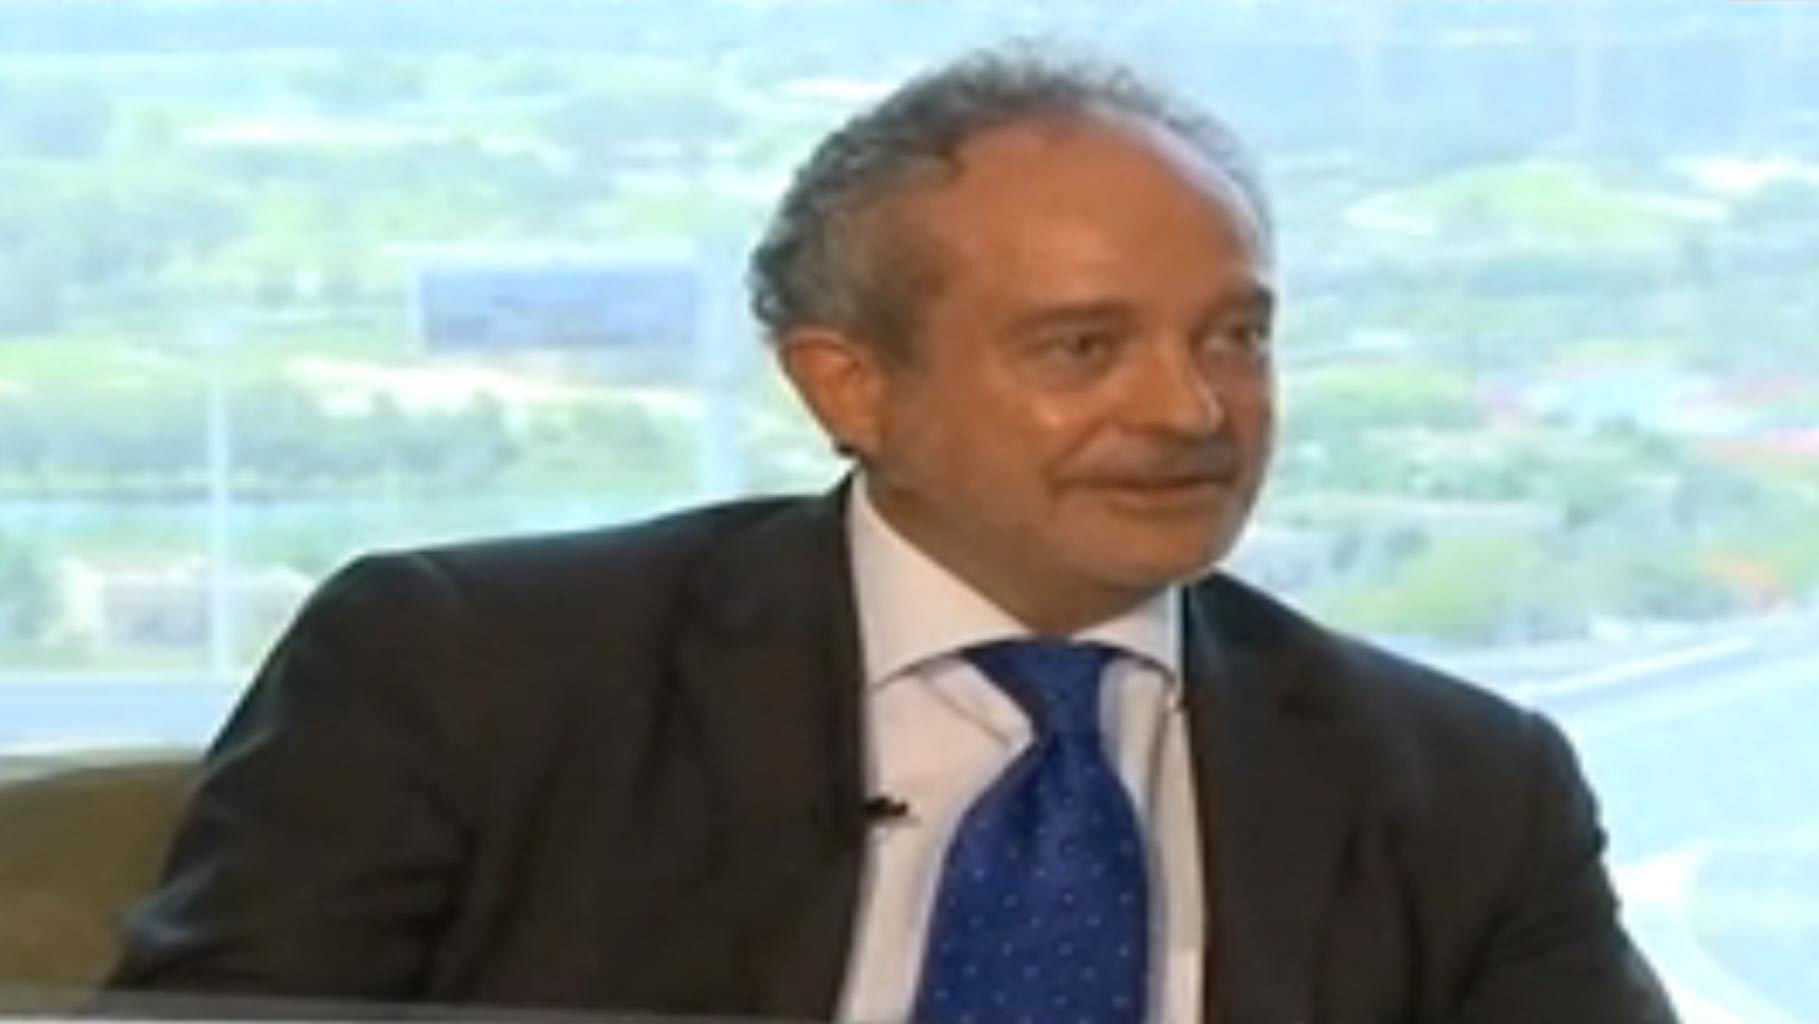 Screenshot of the interview of Christian Michel James with NDTV in Dubai on Thursday, 12 May 2016.